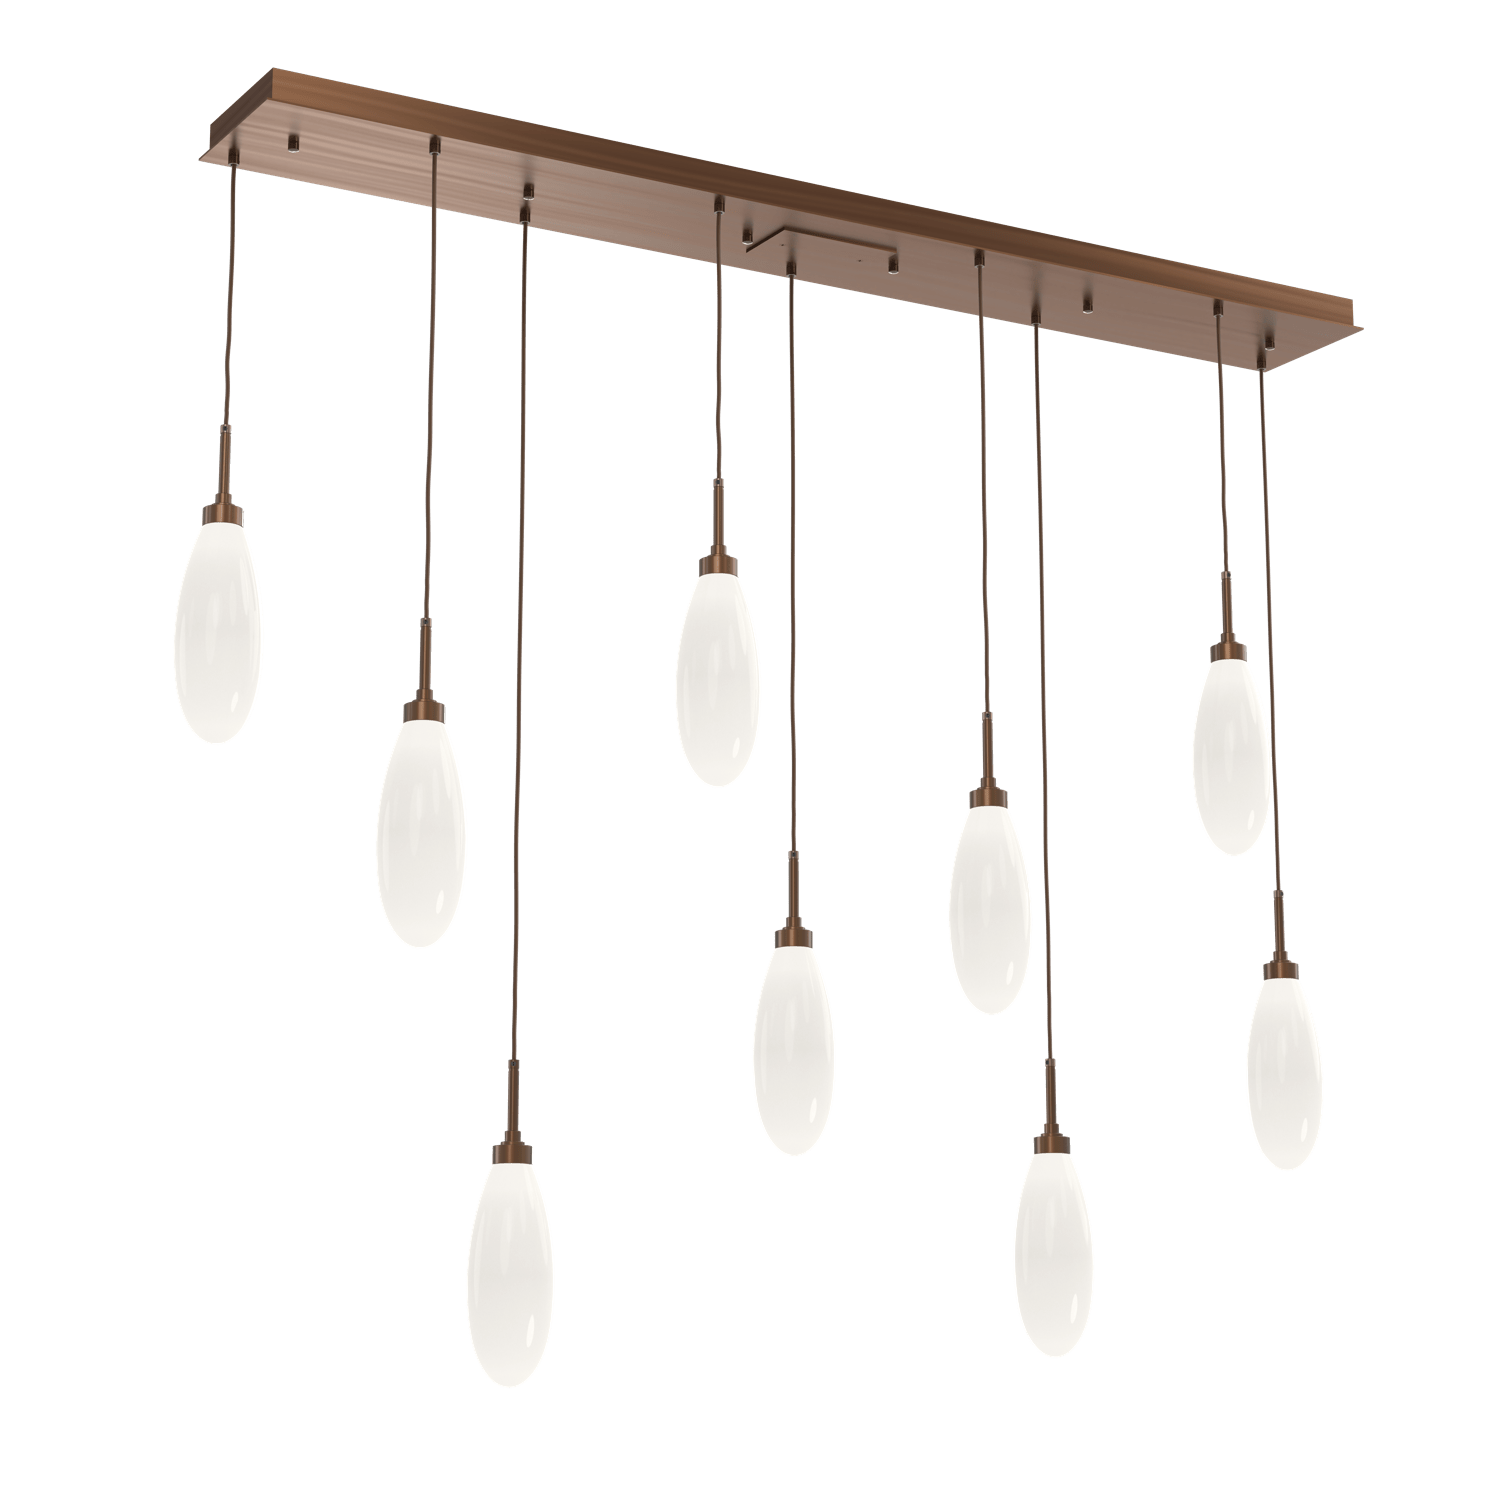 PLB0071-09-RB-WL-LL-Hammerton-Studio-Fiori-9-light-linear-pendant-chandelier-with-oil-rubbed-bronze-finish-and-opal-white-glass-shades-and-LED-lamping